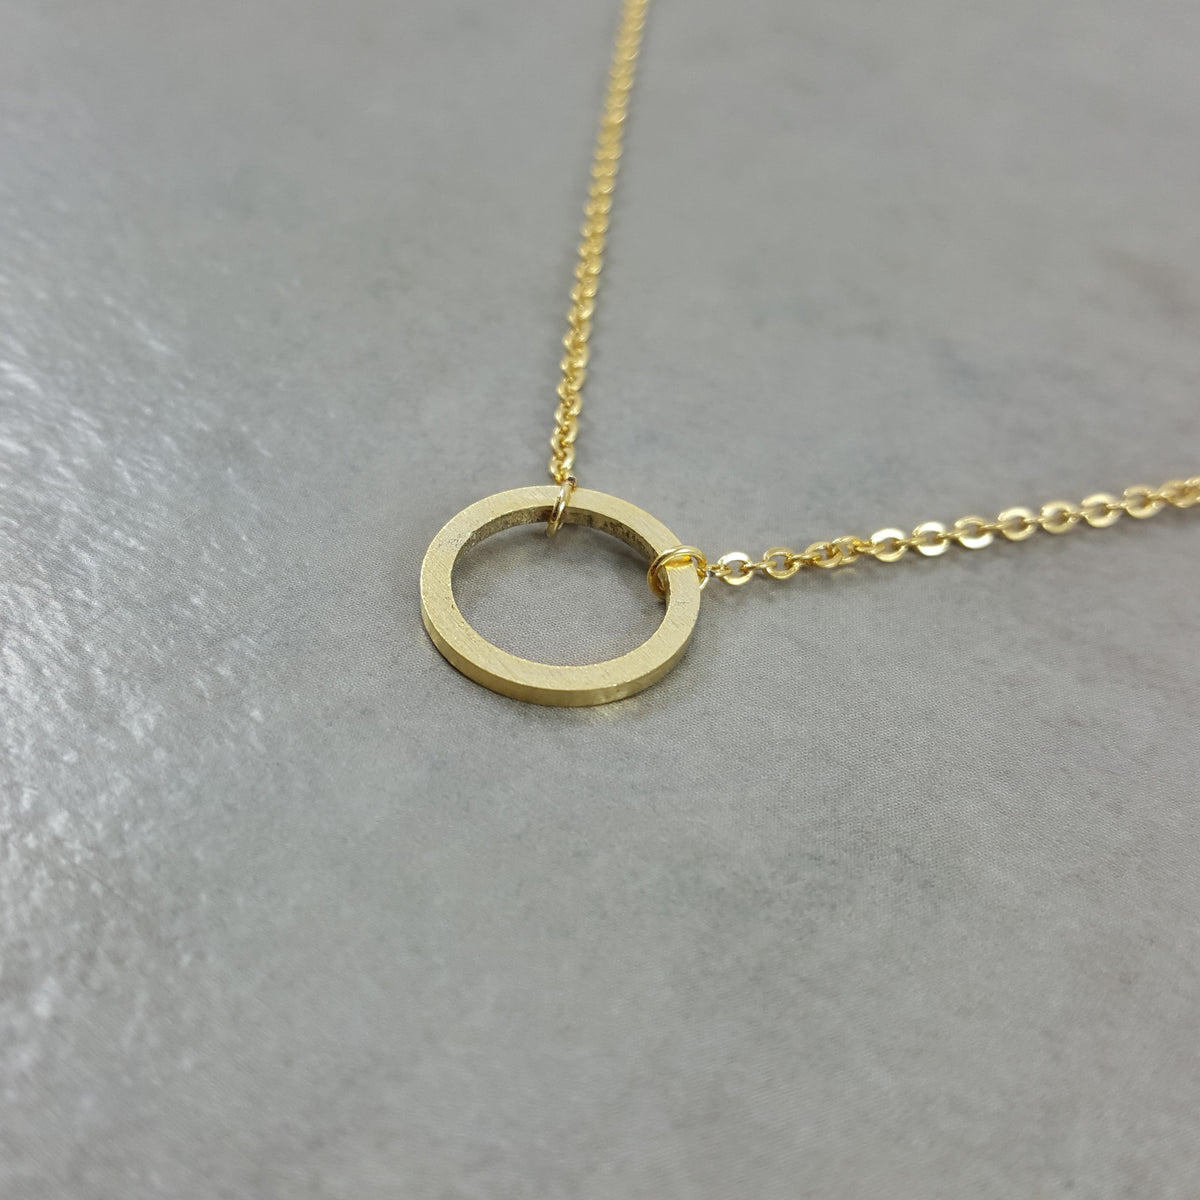 Circle Thin Fine Karma Gold Necklace - Women's Round Good Luck Jewelry ...